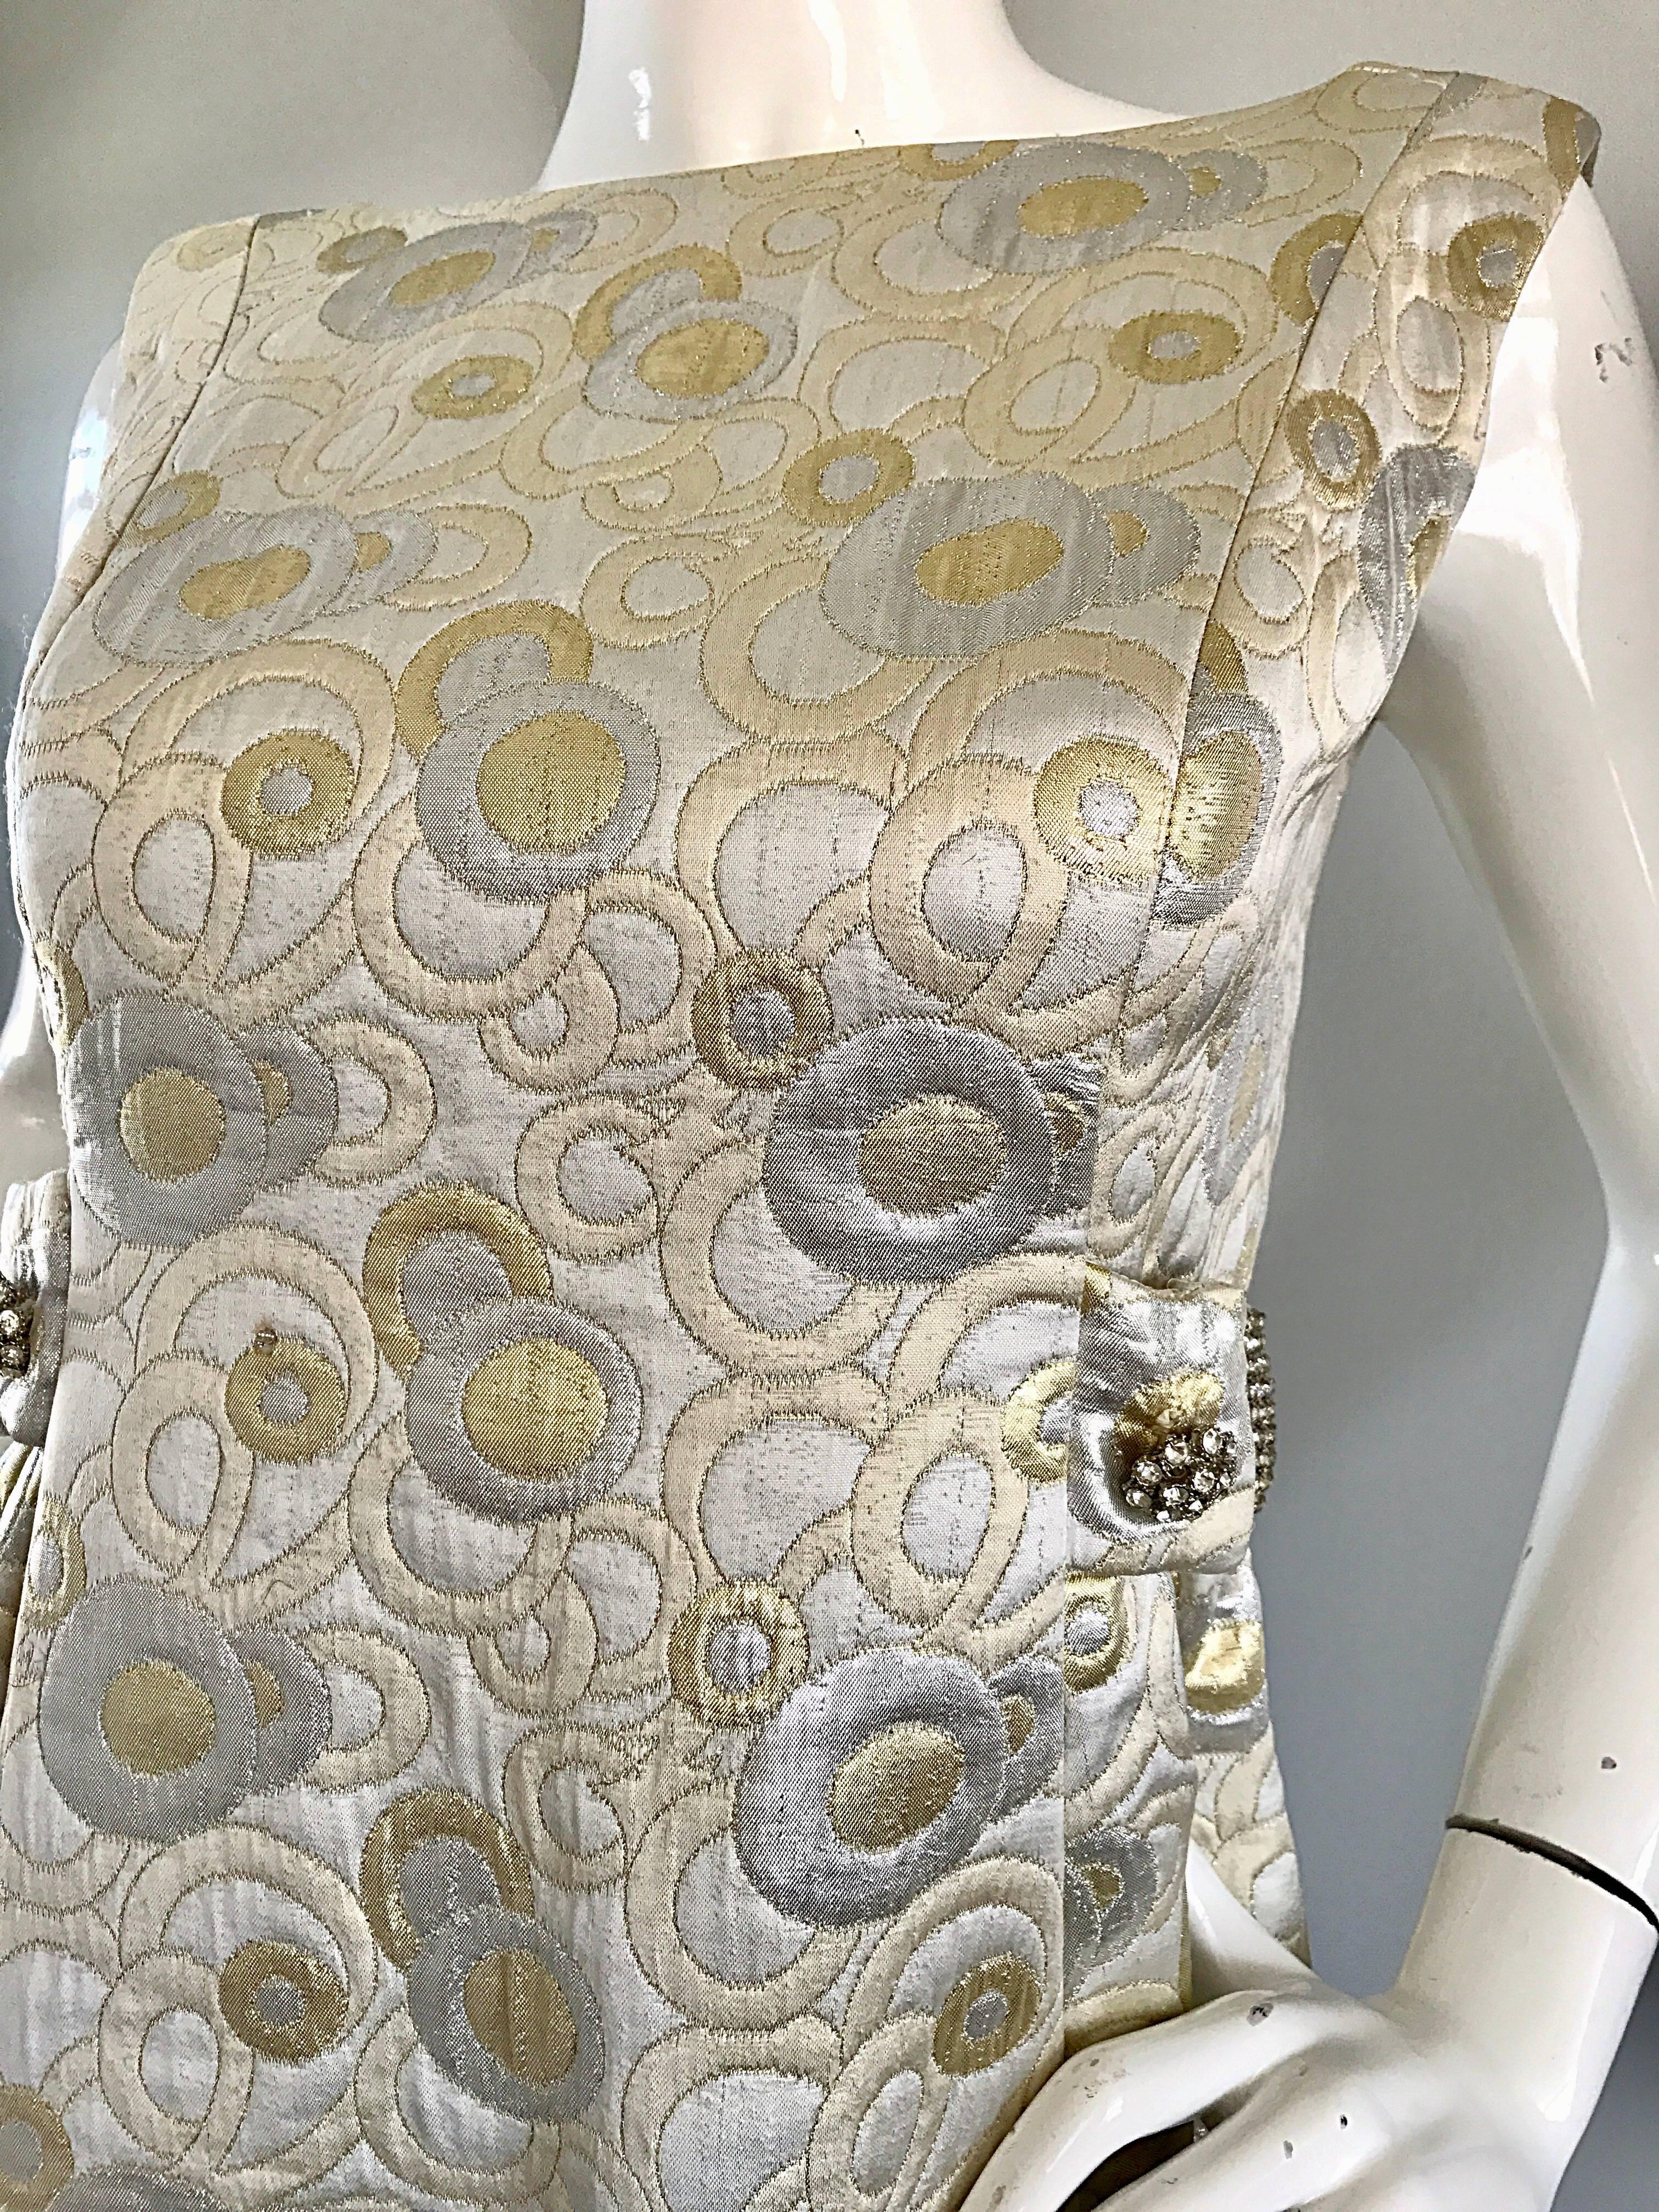 Amazing 1960s demi couture silver and gold silk brocade sleeveless evening dress! Features mod circular shapes throughout in silver and gold. Attached rhinestone belt on the back leads to rhinestones on each side of the waist. Sleek tailored bodice,